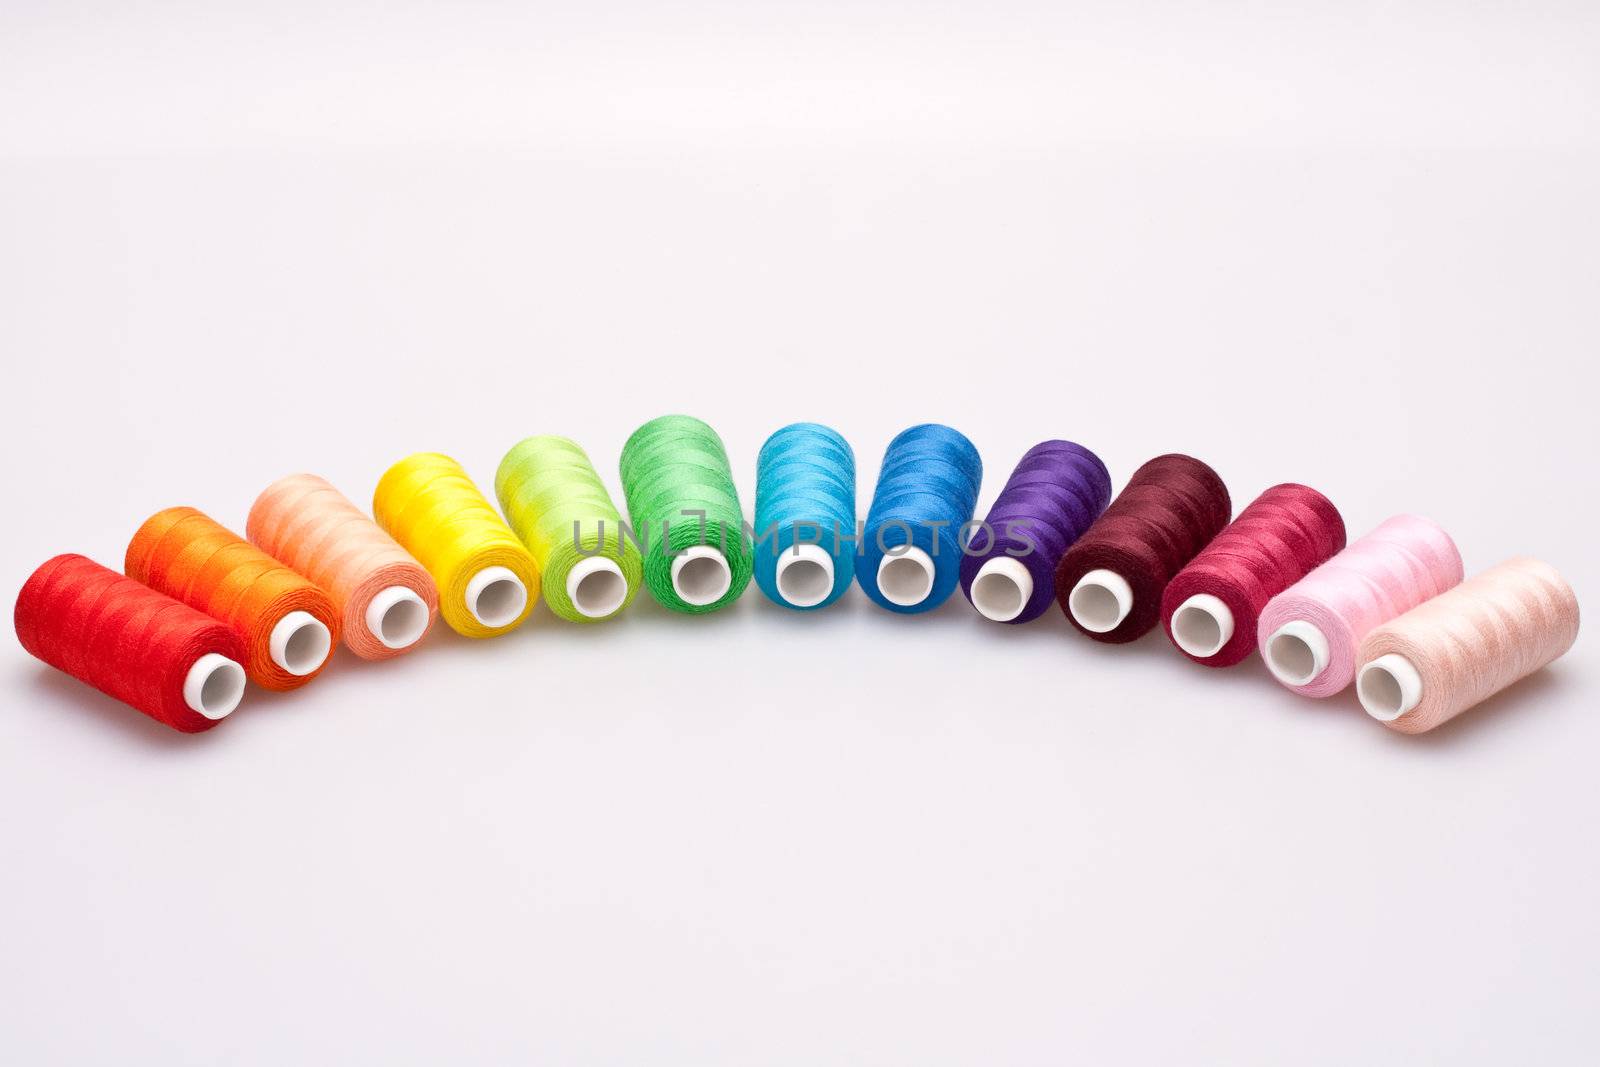 colored thread for sewing by Lupen